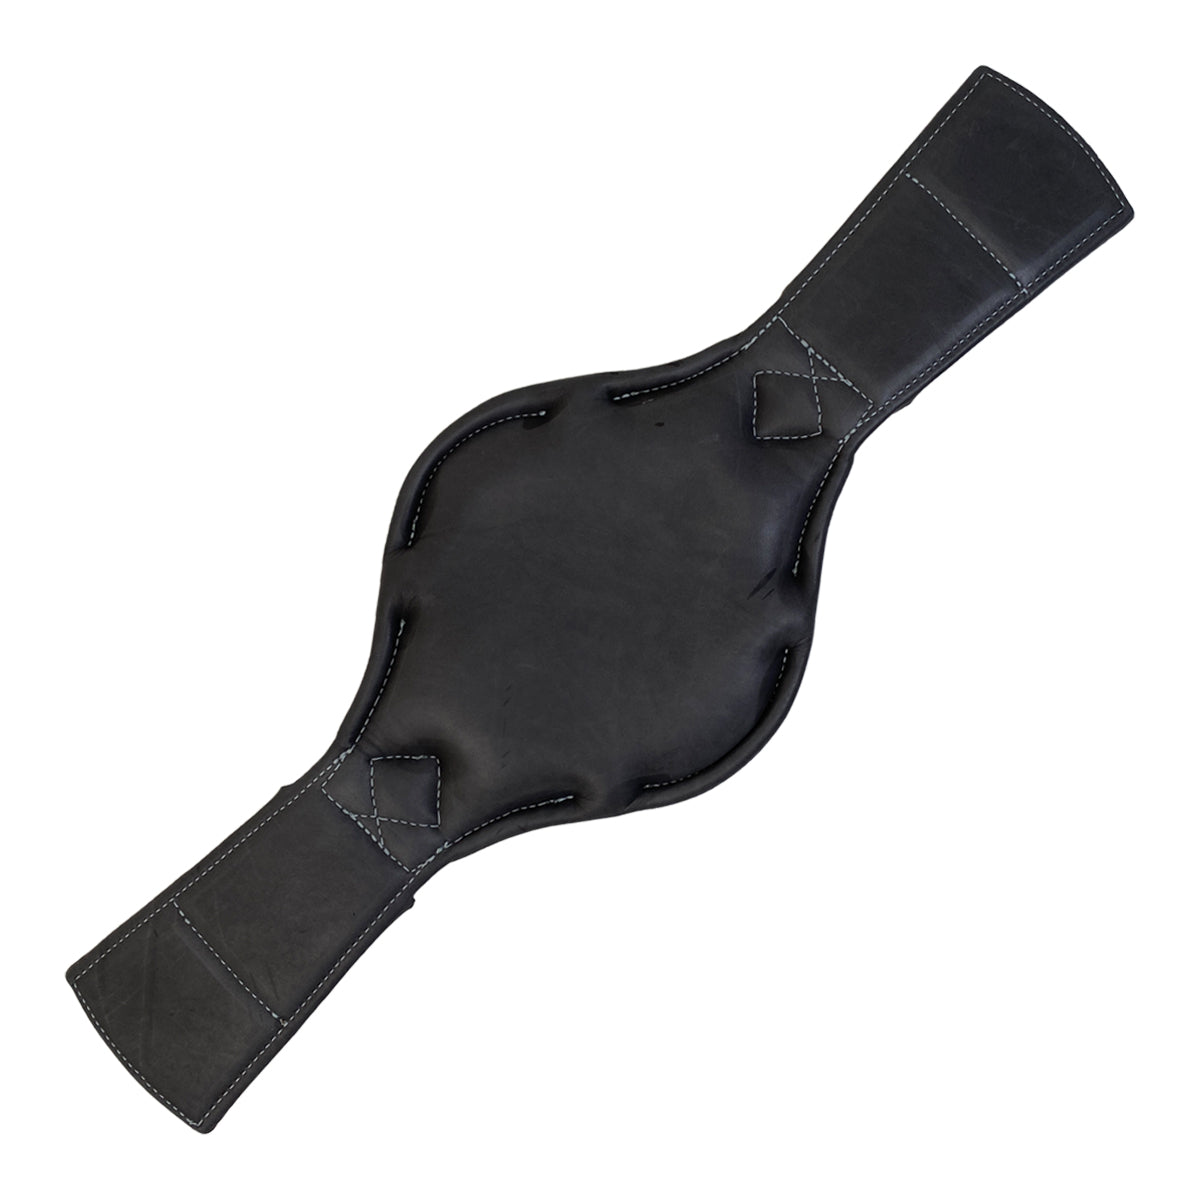 Kingsley Dressage Girth Special Elastic in Charcoal